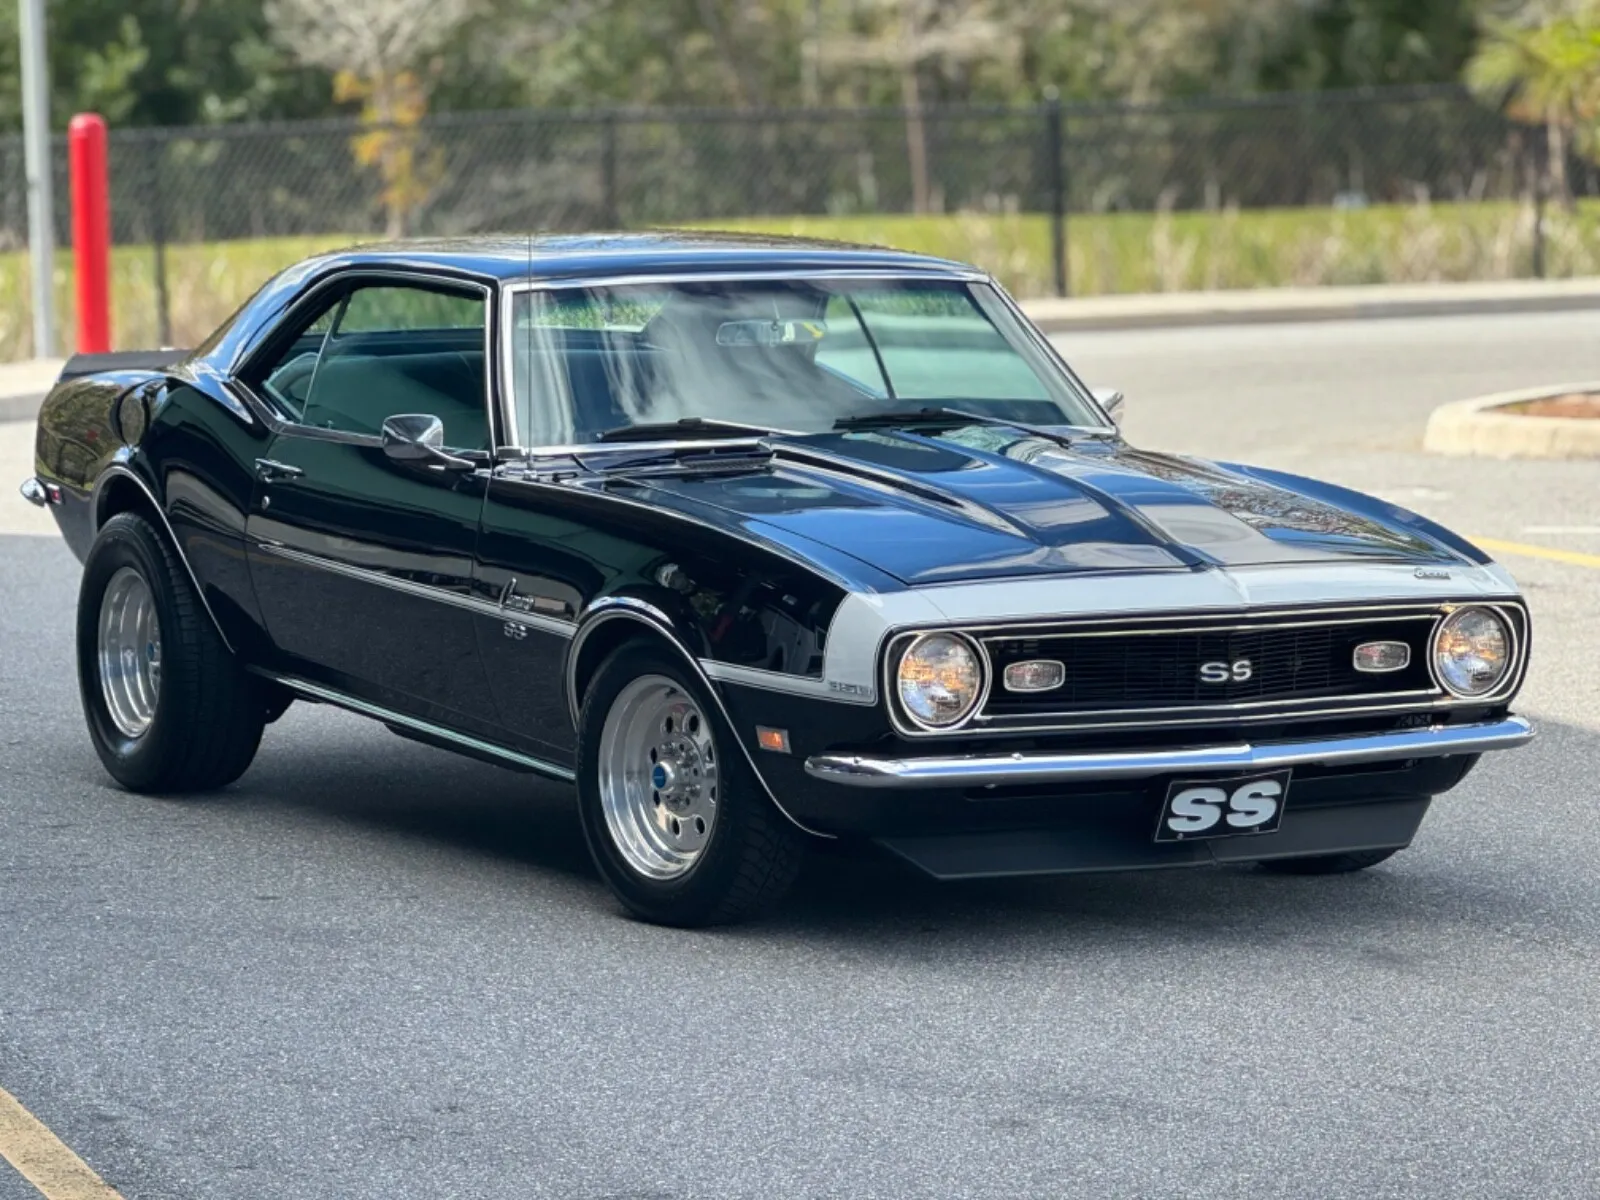 1968 Chevrolet Camaro SS tribute [perfect shape] for sale